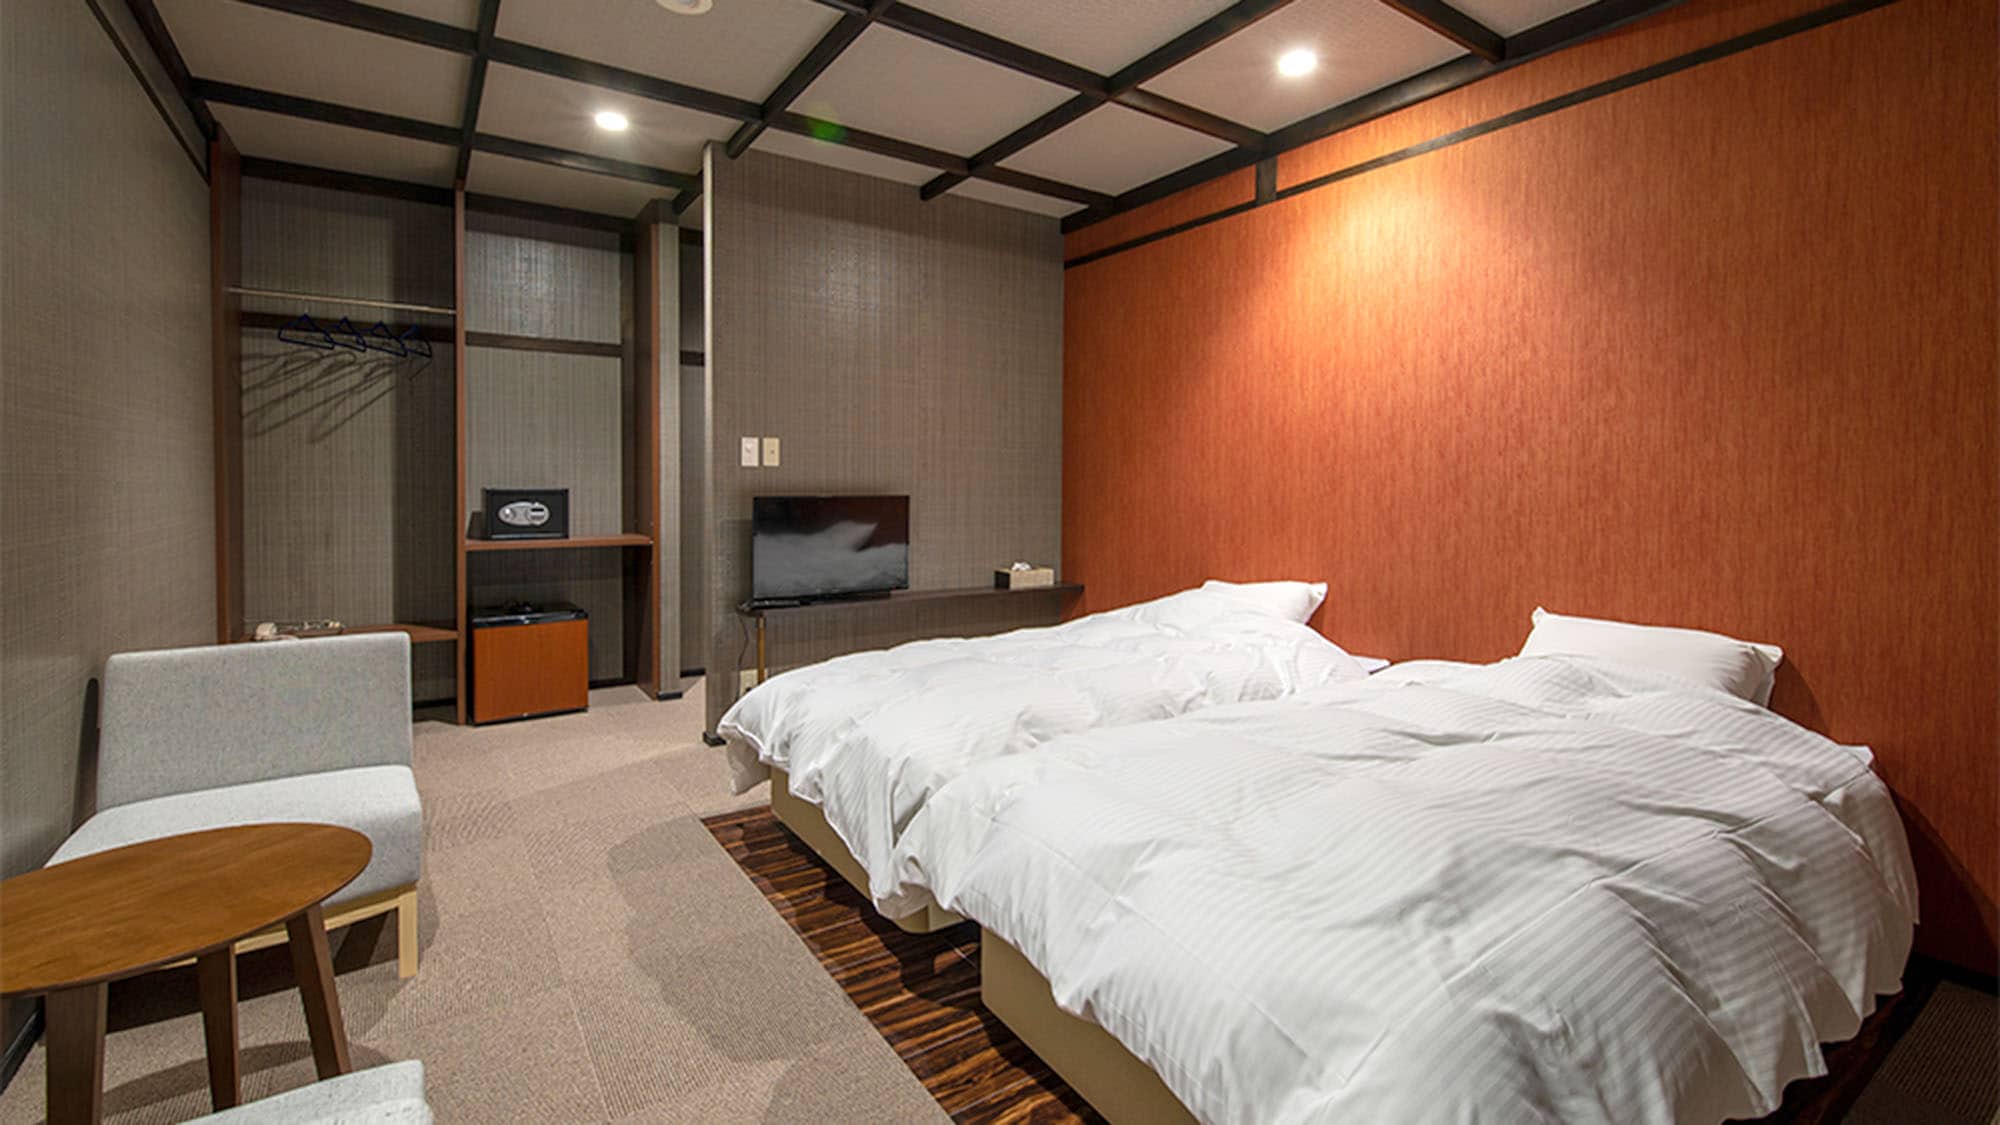 ・ Have a good time in a spacious modern Japanese and Western room.